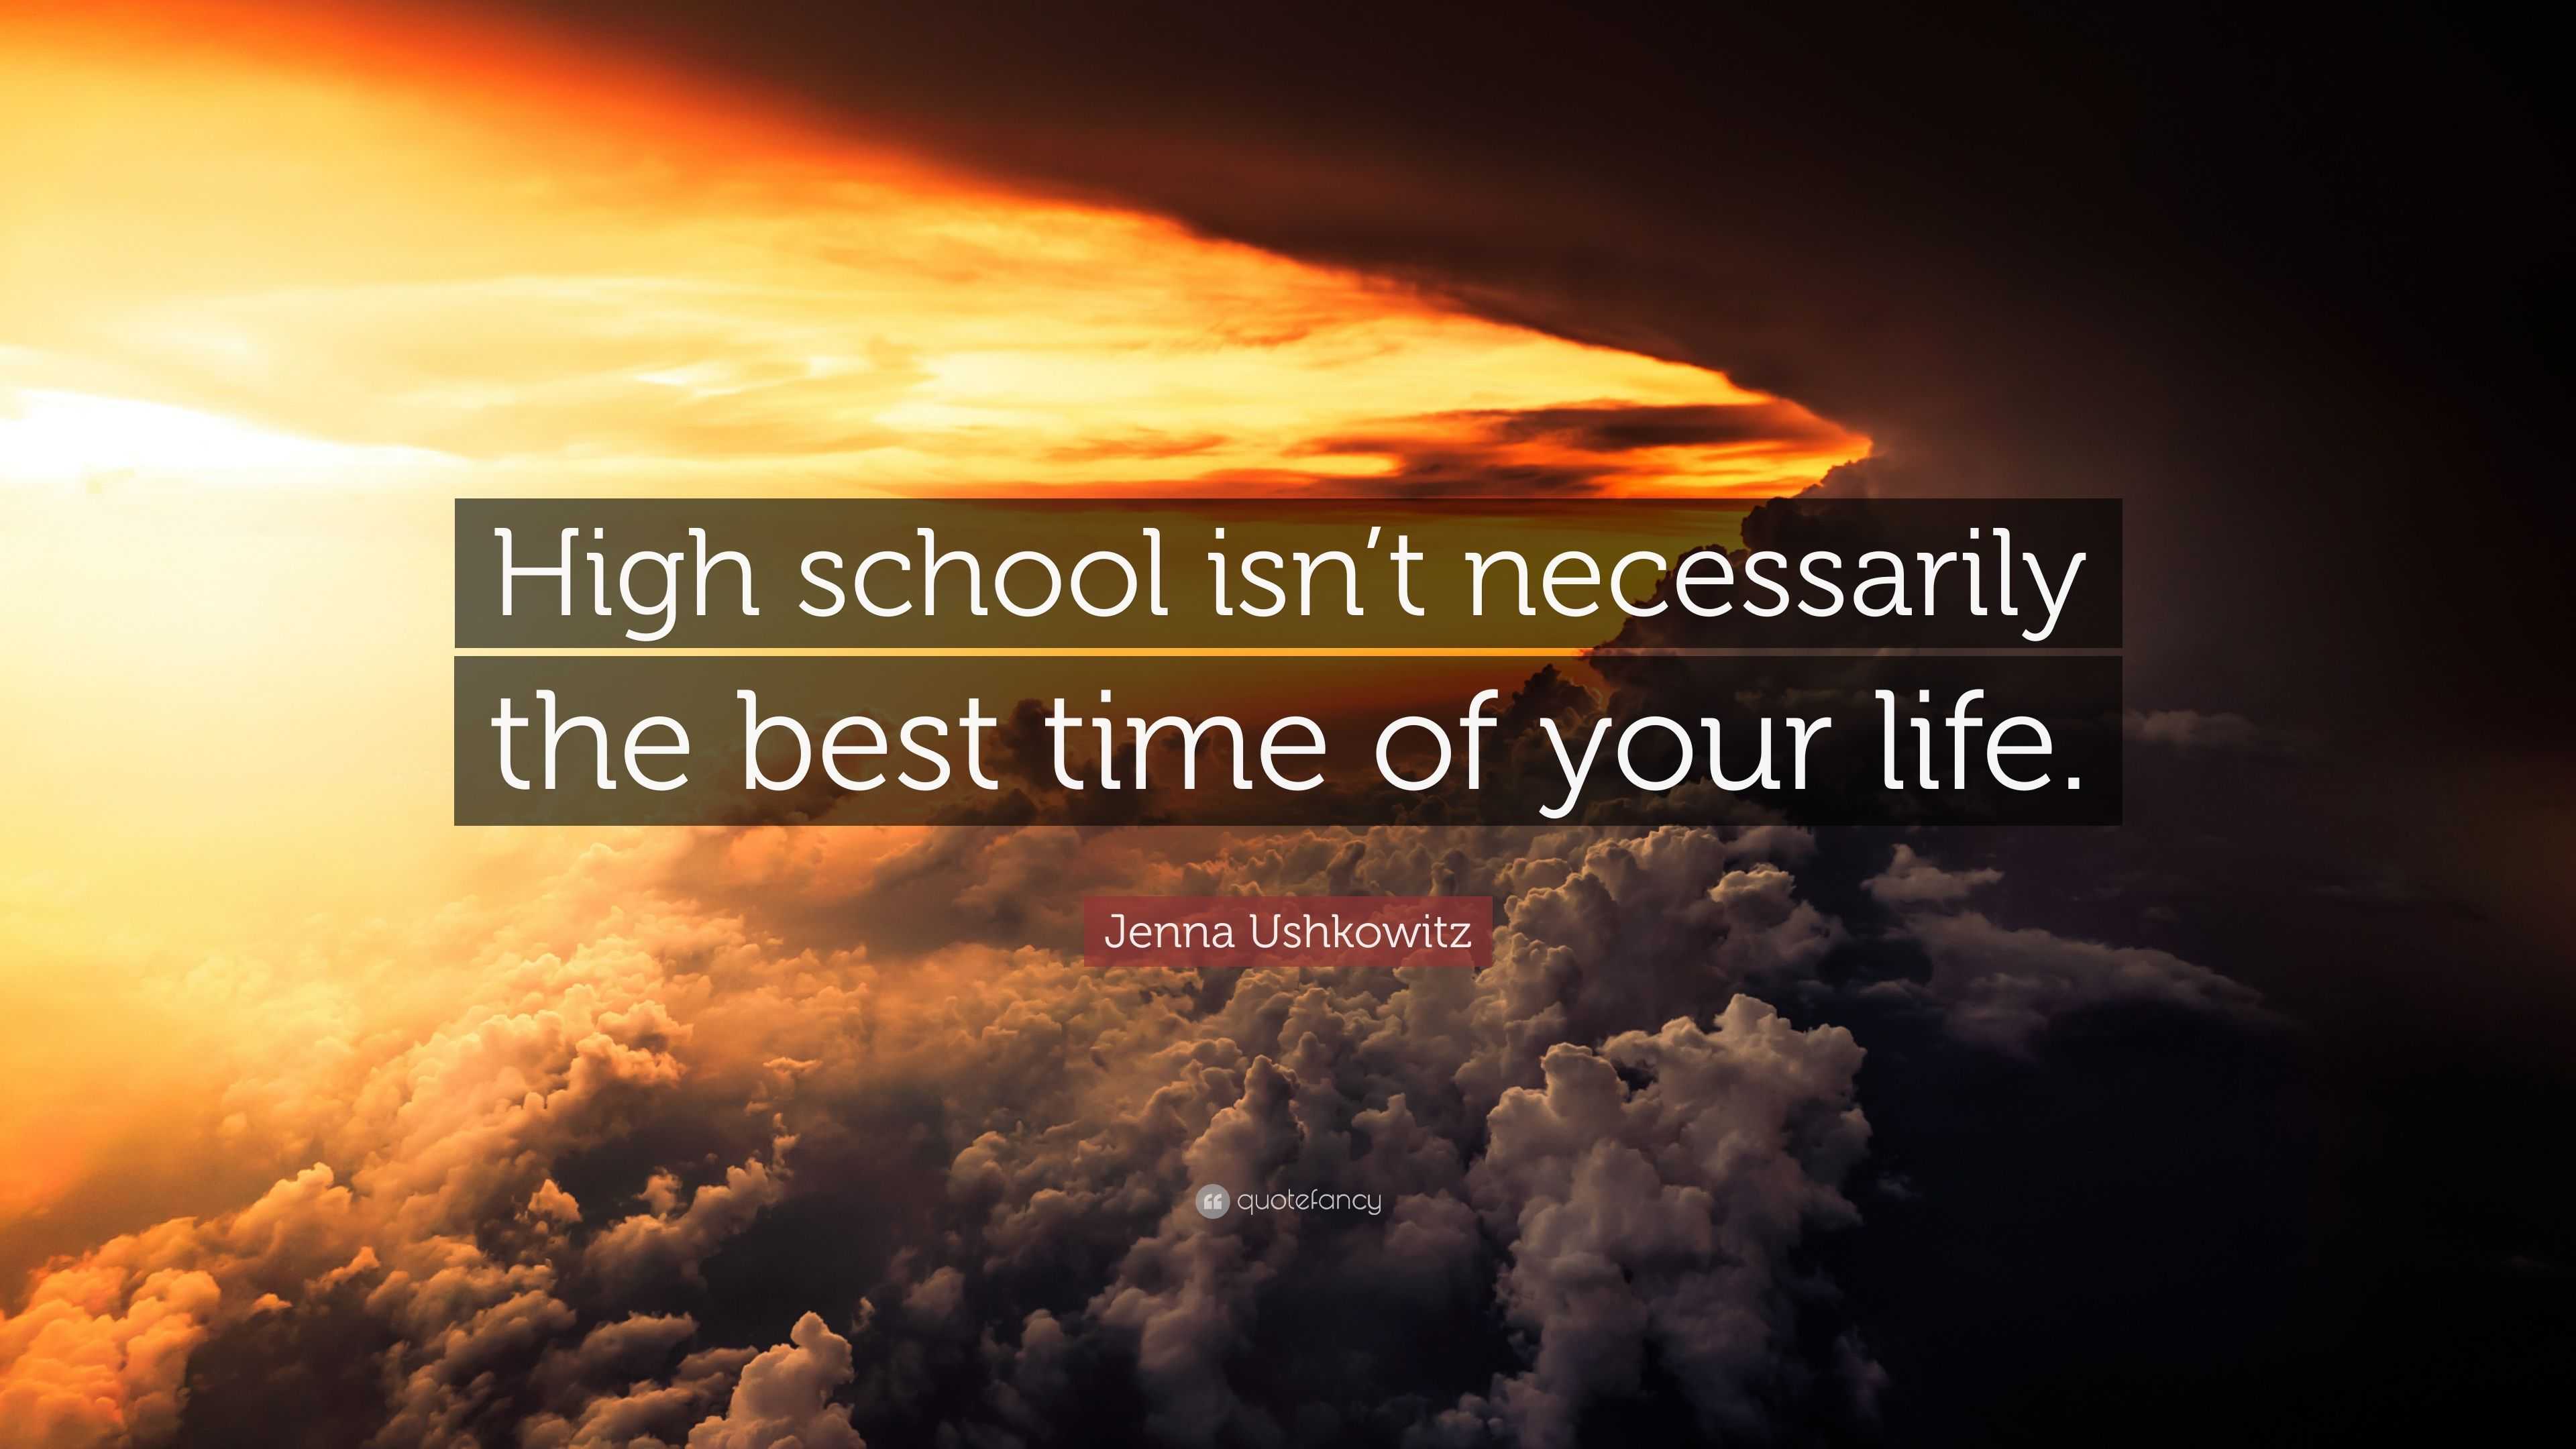 Jenna Ushkowitz Quote “High school isn t necessarily the best time of your